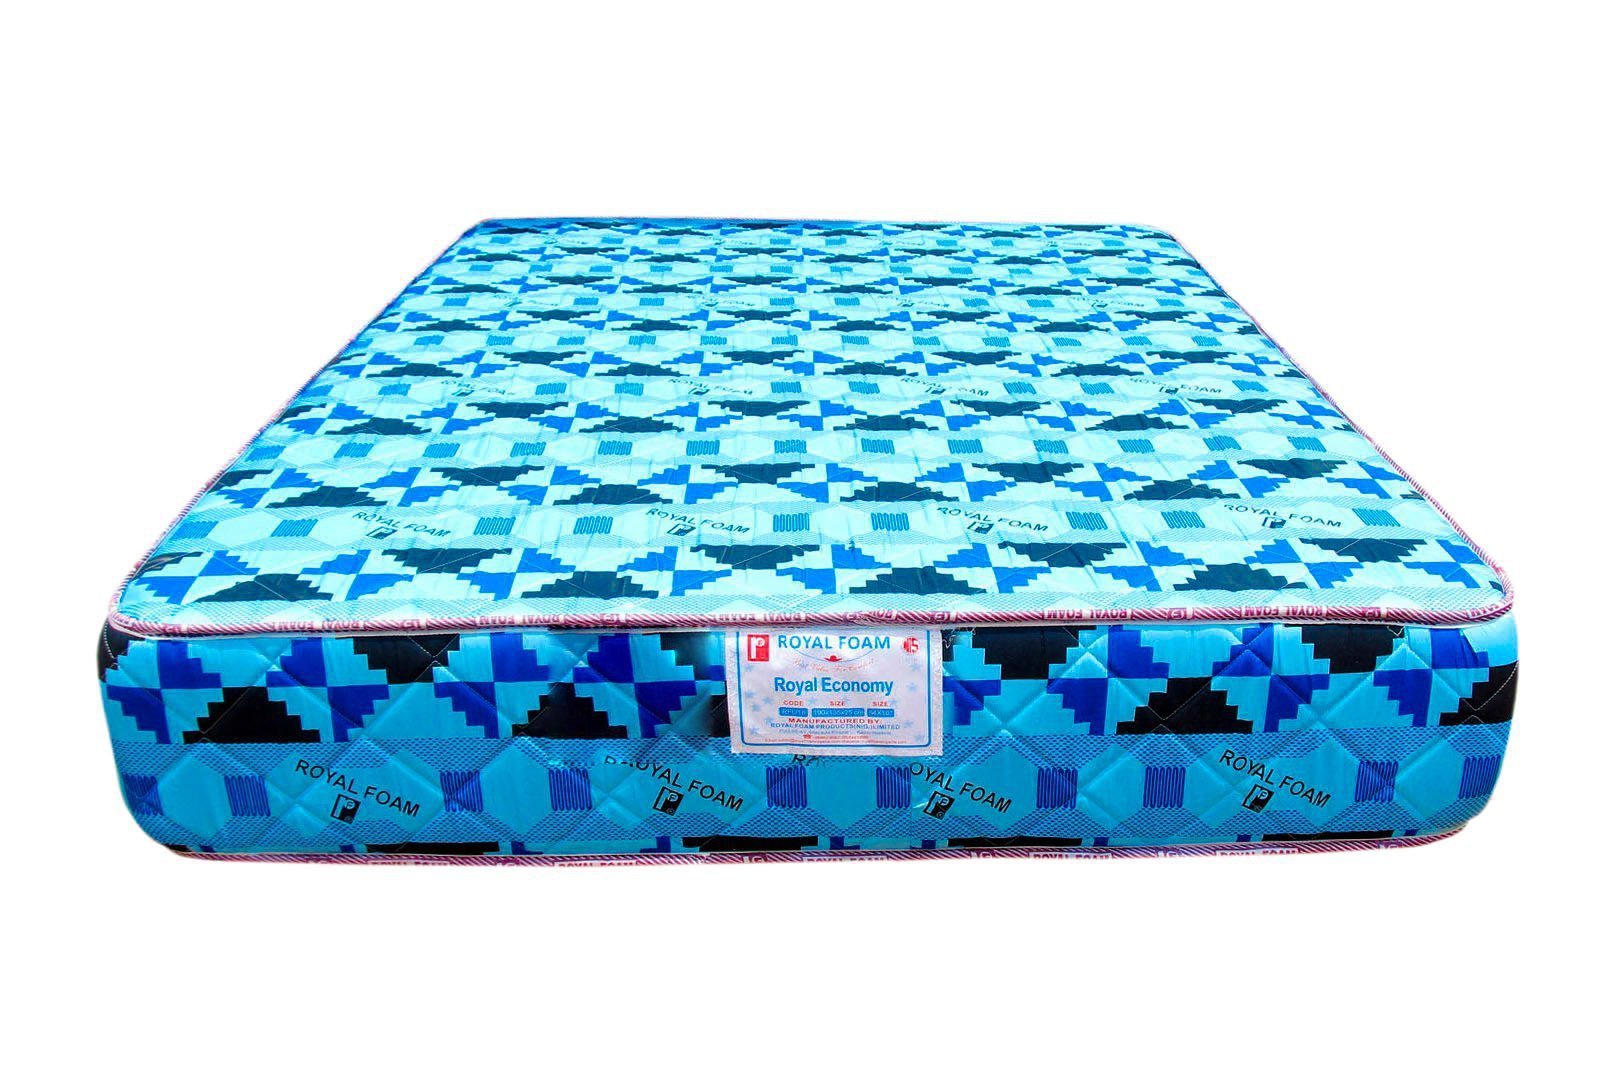 Royal Economy-Poly Cotton Fabric - Fully Quilted Mattress [75 x 72 x 10"] [6ft x 6ft x 10inches](Lagos Only)